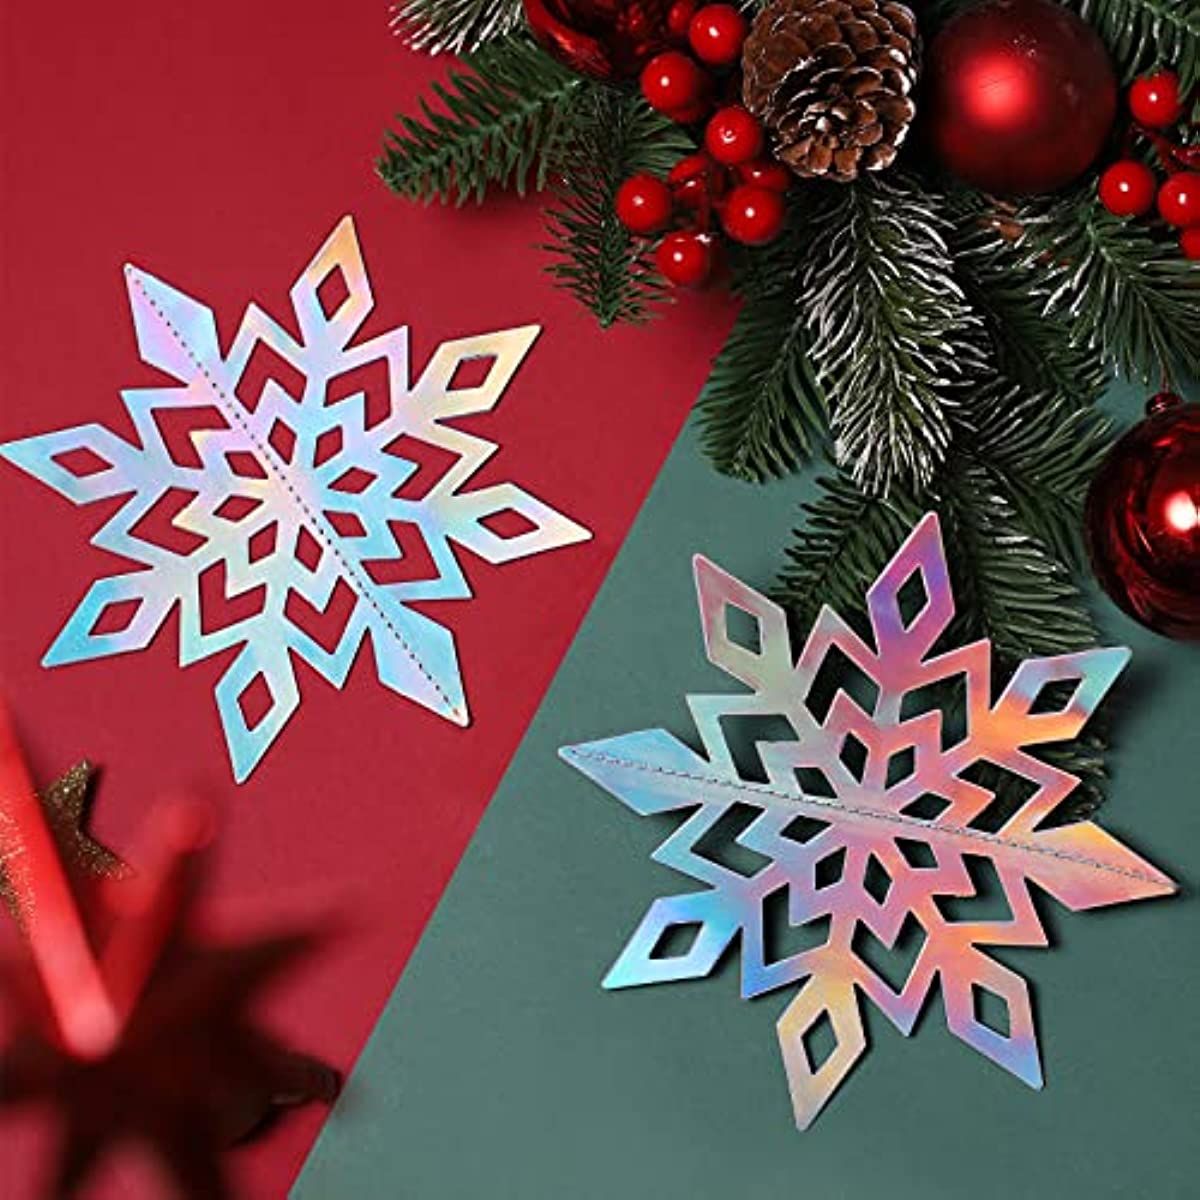 Christmas Snowflake Hanging Decorations 12pcs Silver Paper Snowflakes Garlands for Christmas Winter Wonderland Holiday New Year Home Ornament, Size